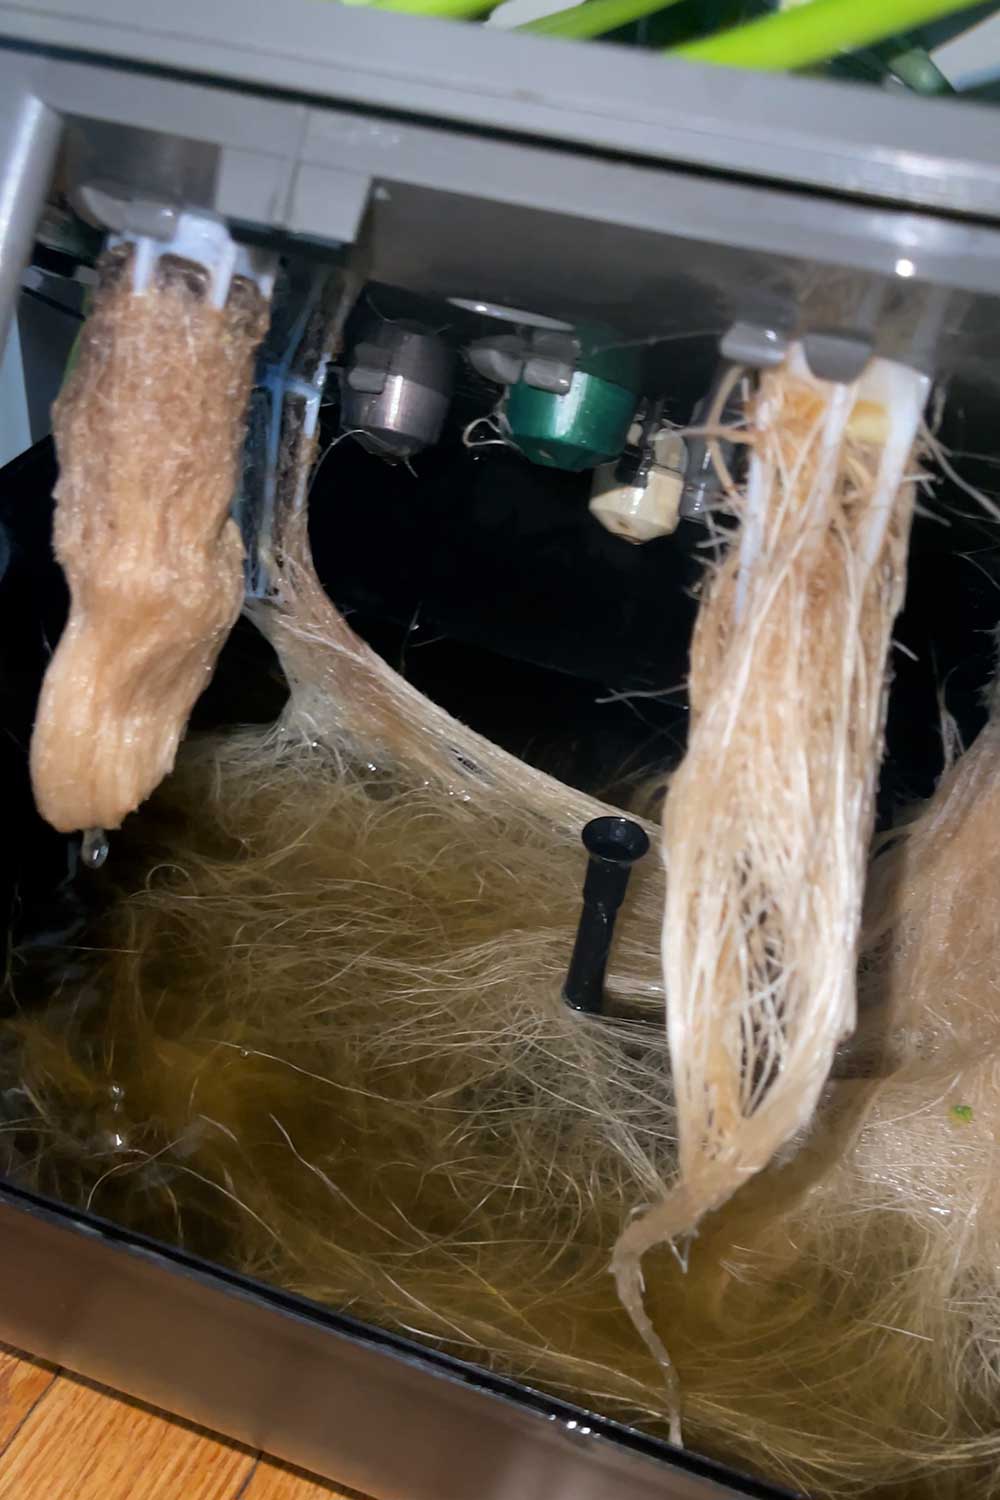 indoor-gardens-with-hydroponic-roots-in-water